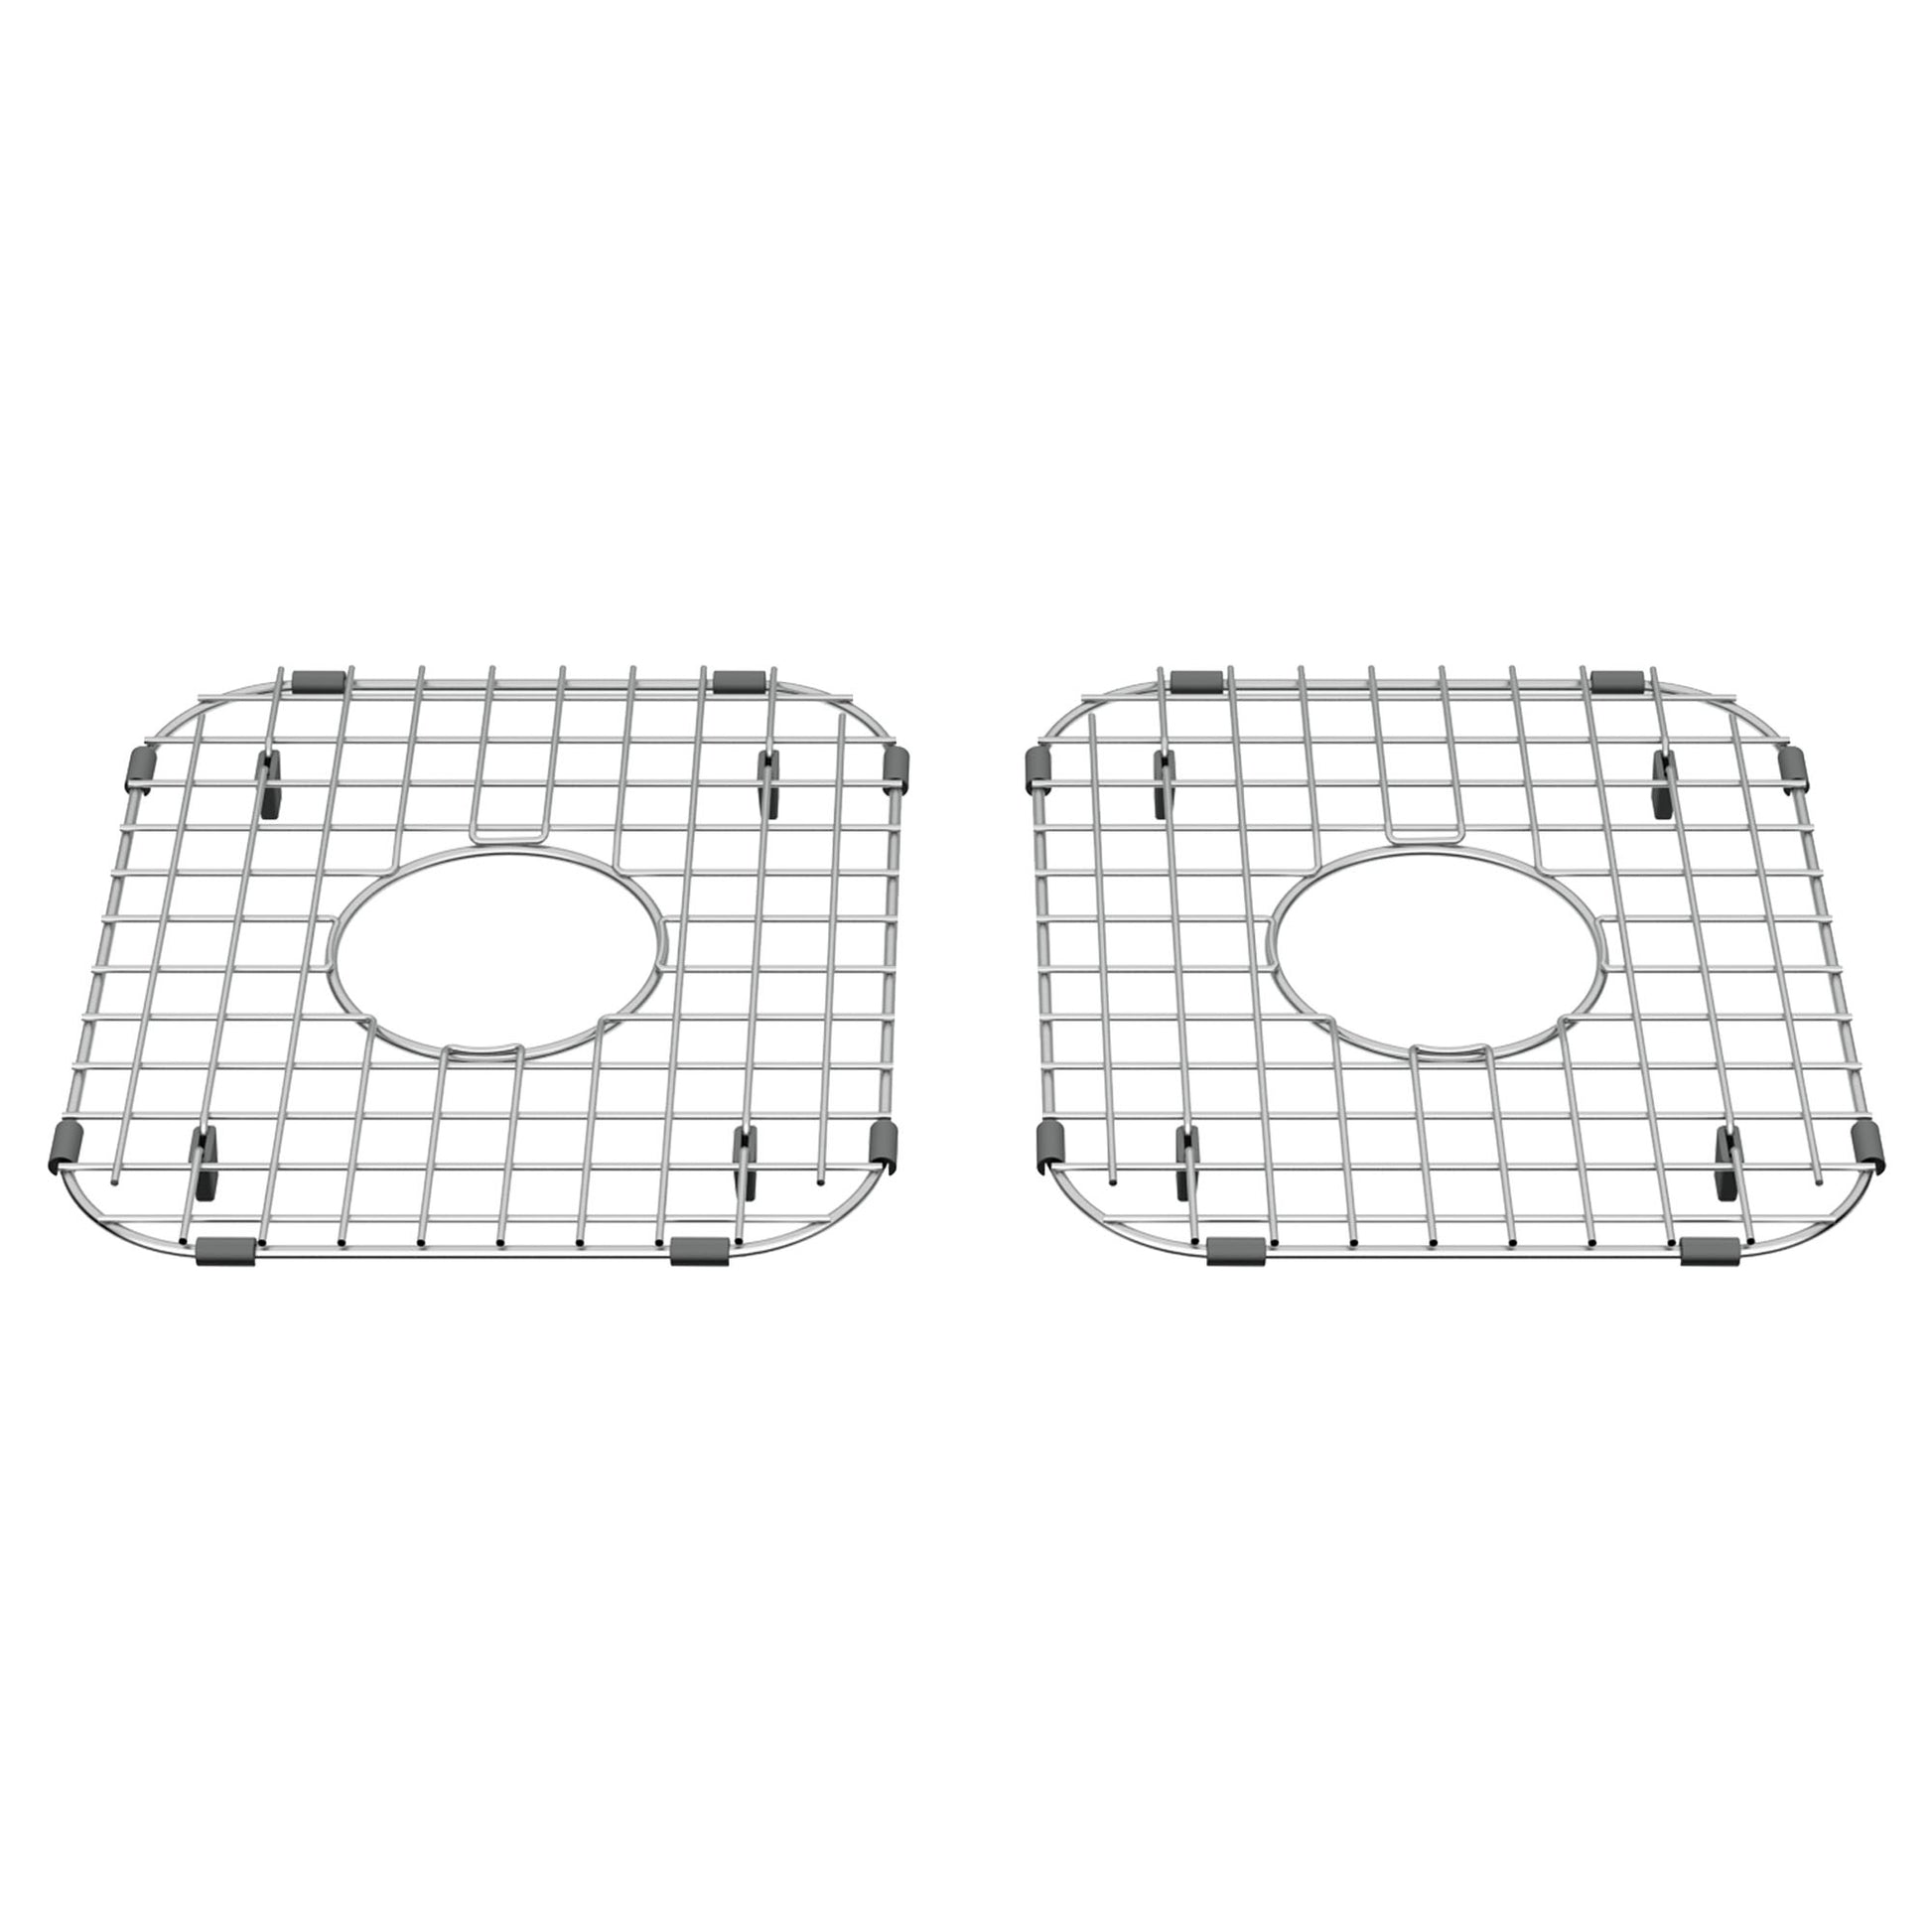 AMERICAN-STANDARD 8419000.075, Delancey 33 x 22-Inch Double Bowl Apron Front Kitchen Sink Grid – Pack of 2 in Stainless Stl